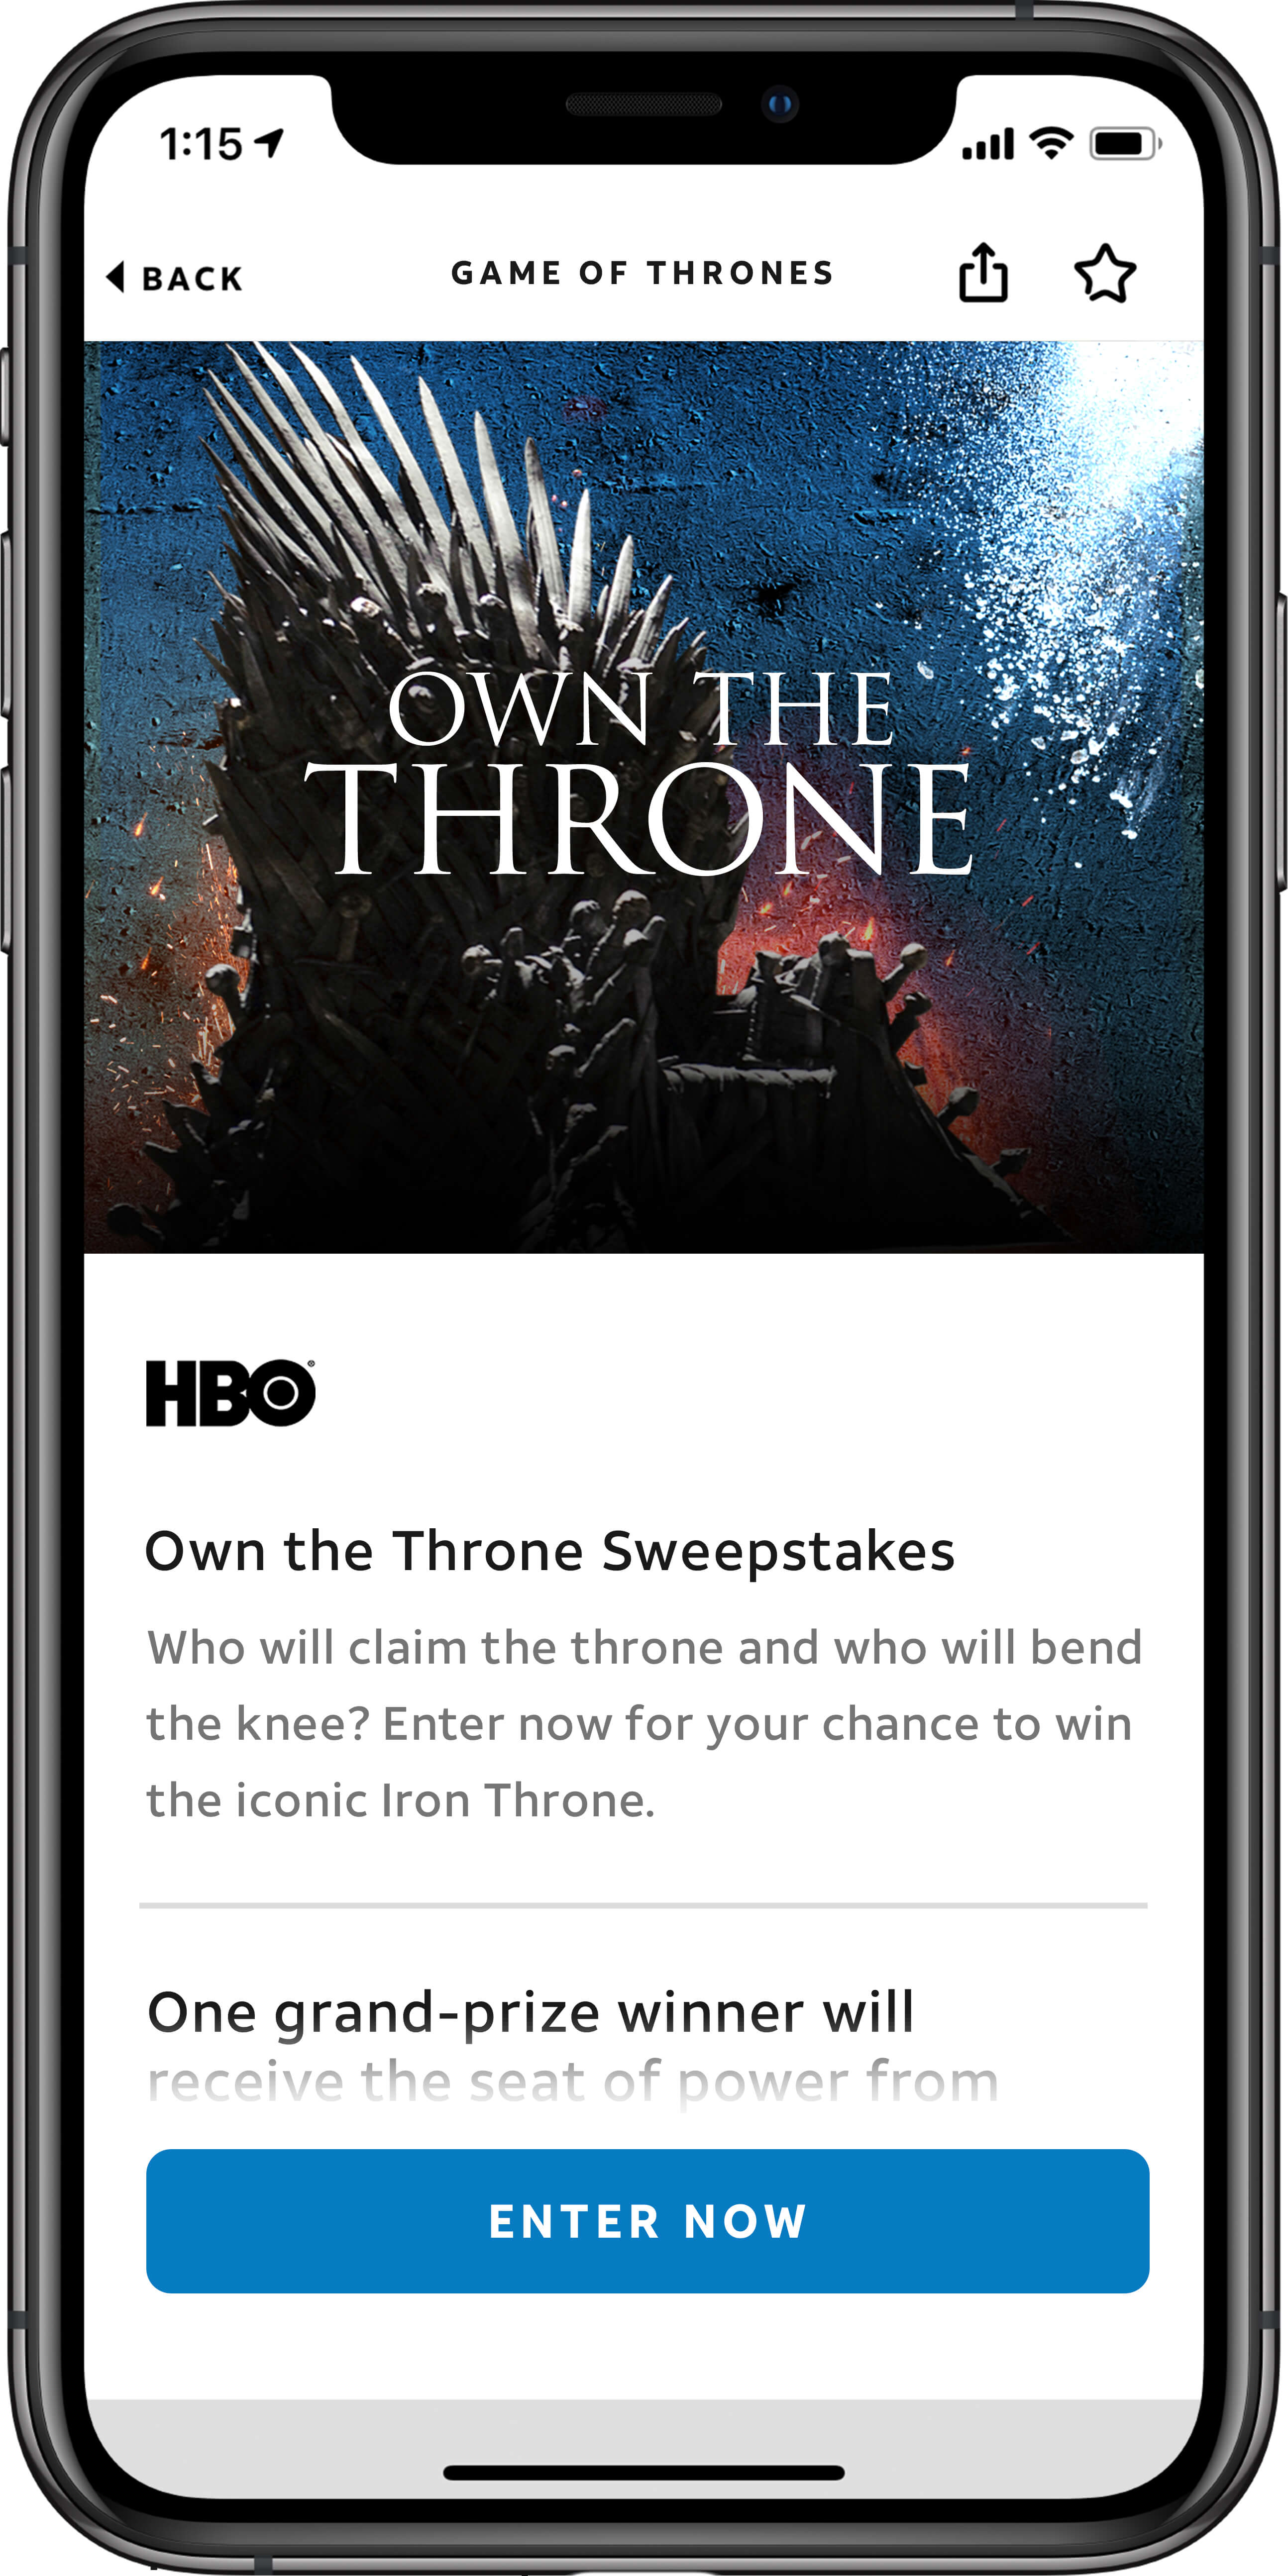 AT&T THANKS®: Own the Throne